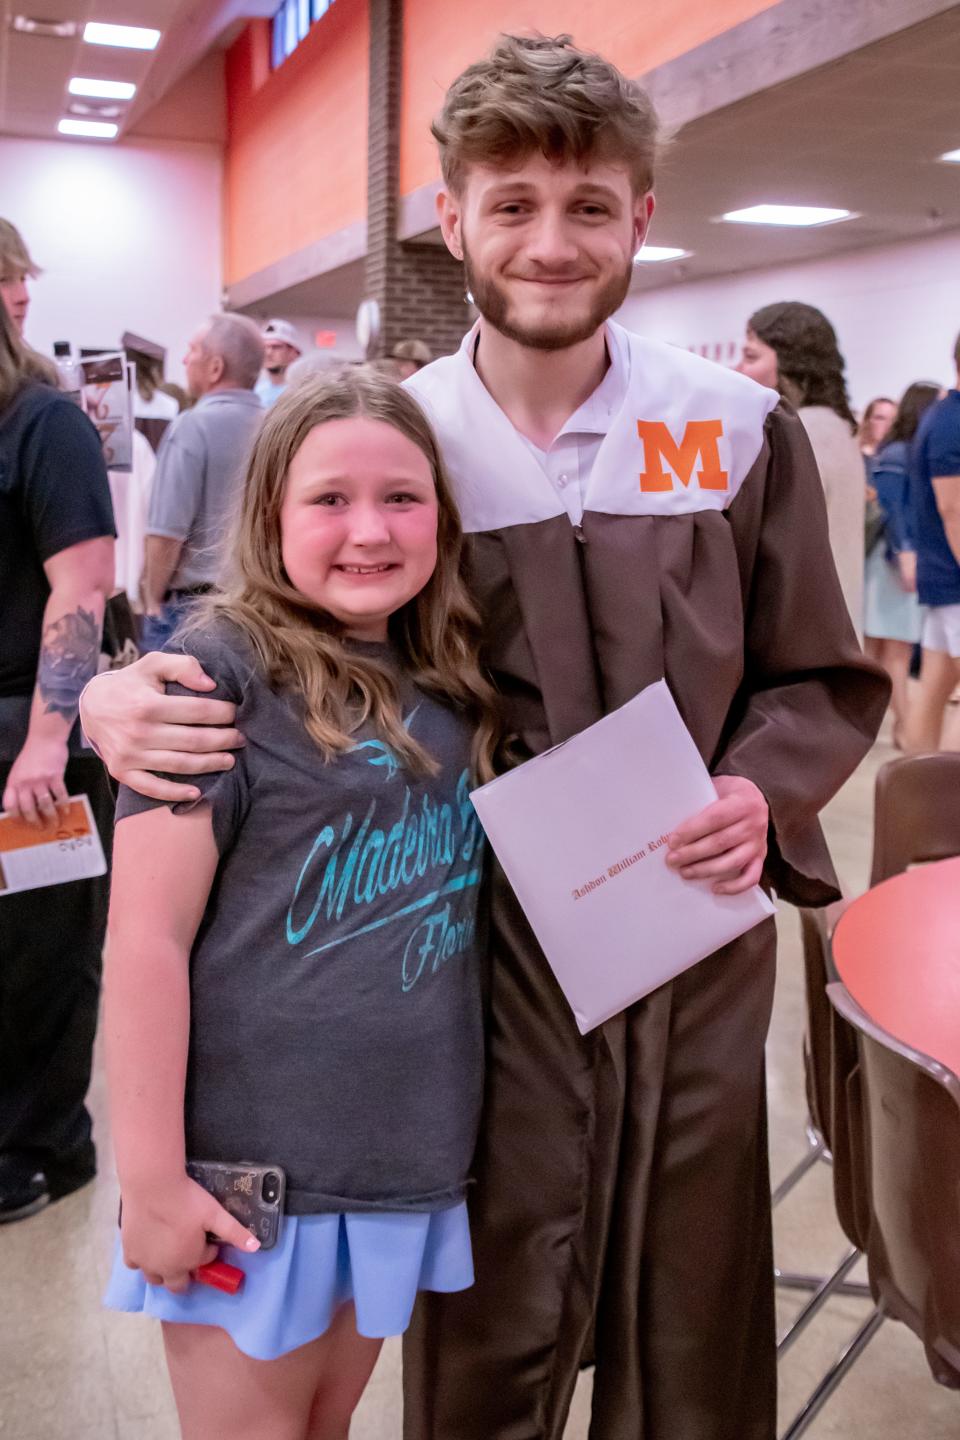 Meadowbrook senior Ashdon Robinson hugs little sister, Luna Garrison after graduation on Friday, May 17. Garrison spent almost the entirety of the ceremony in tears as she watched her brother with pride.